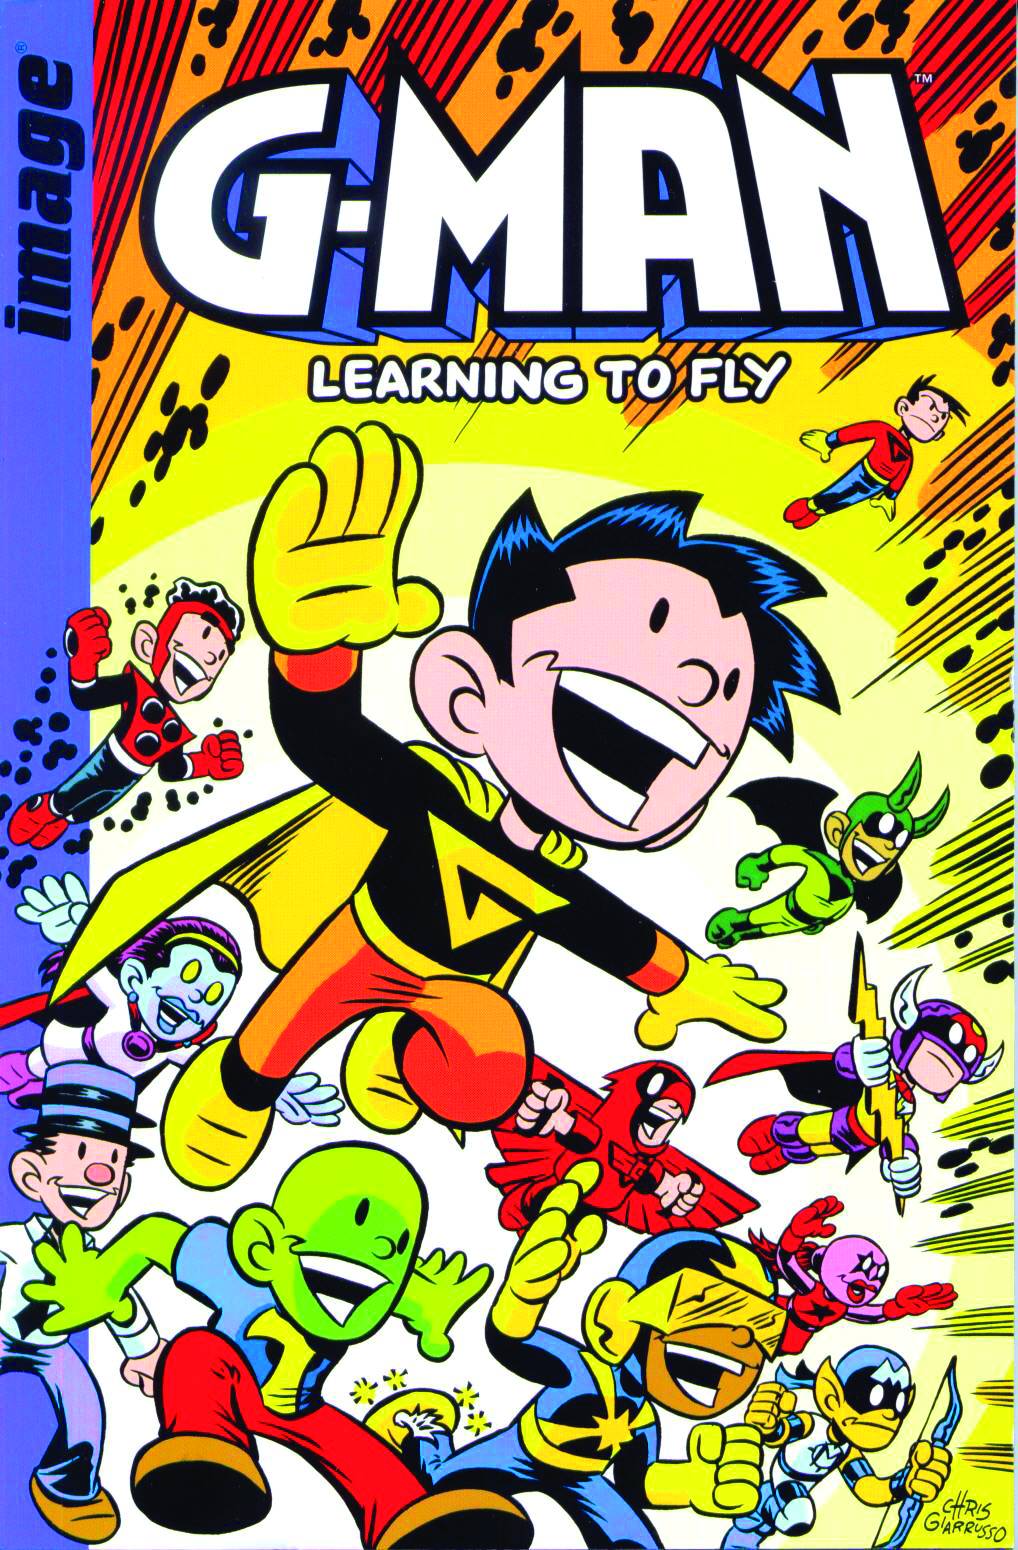 G-Man Graphic Novel Volume 1 Learning To Fly